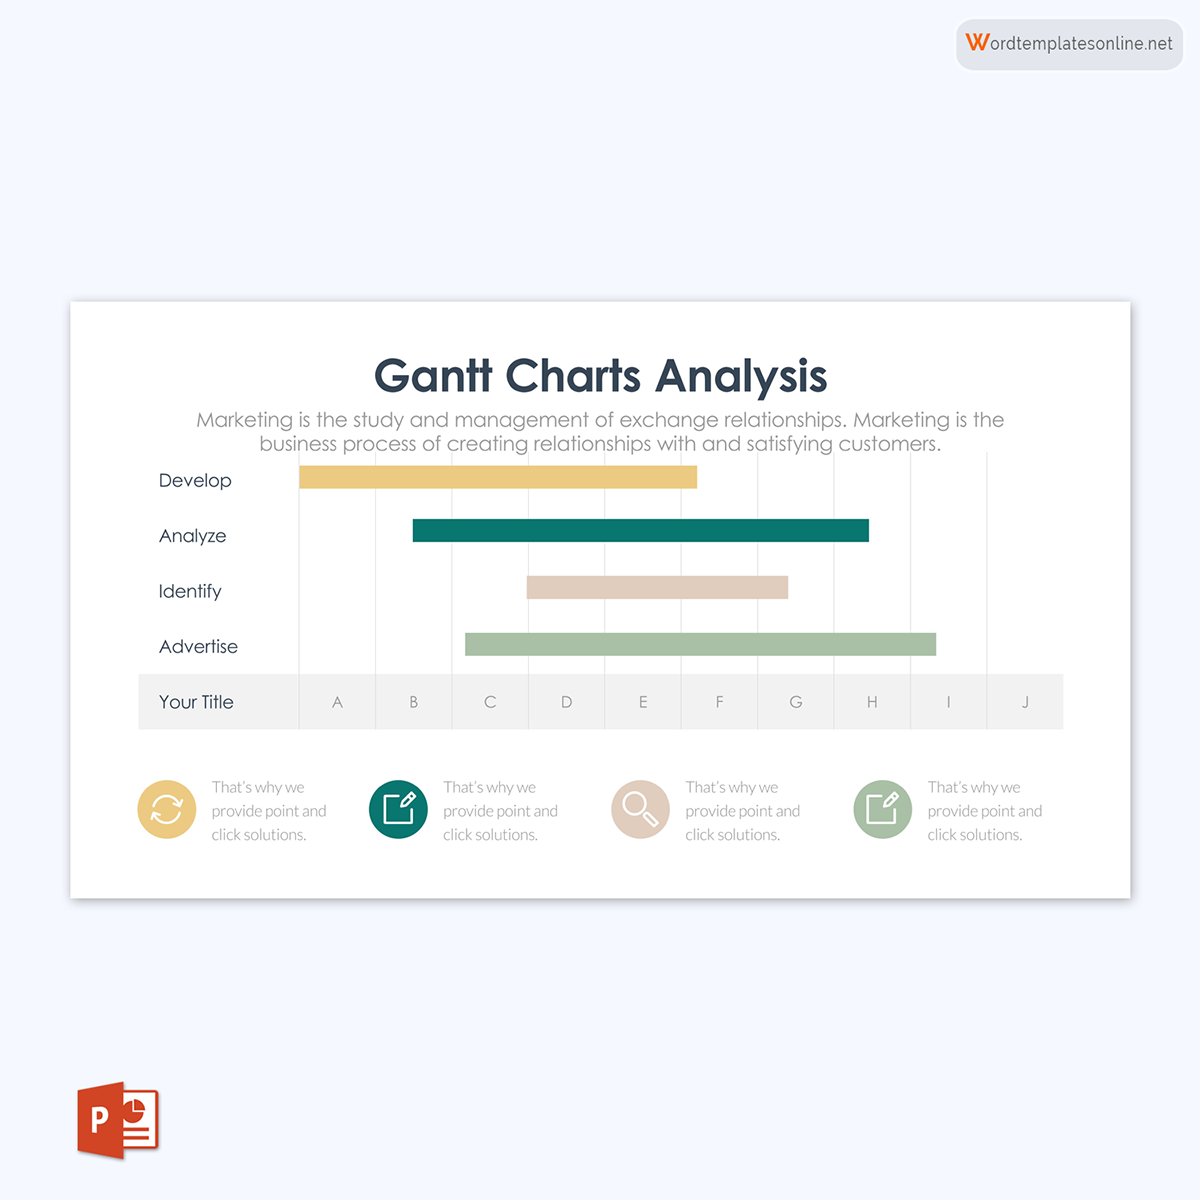 Professional Editable Title Based Gantt Chart Analysis Template 07 as PowerPoint Slides